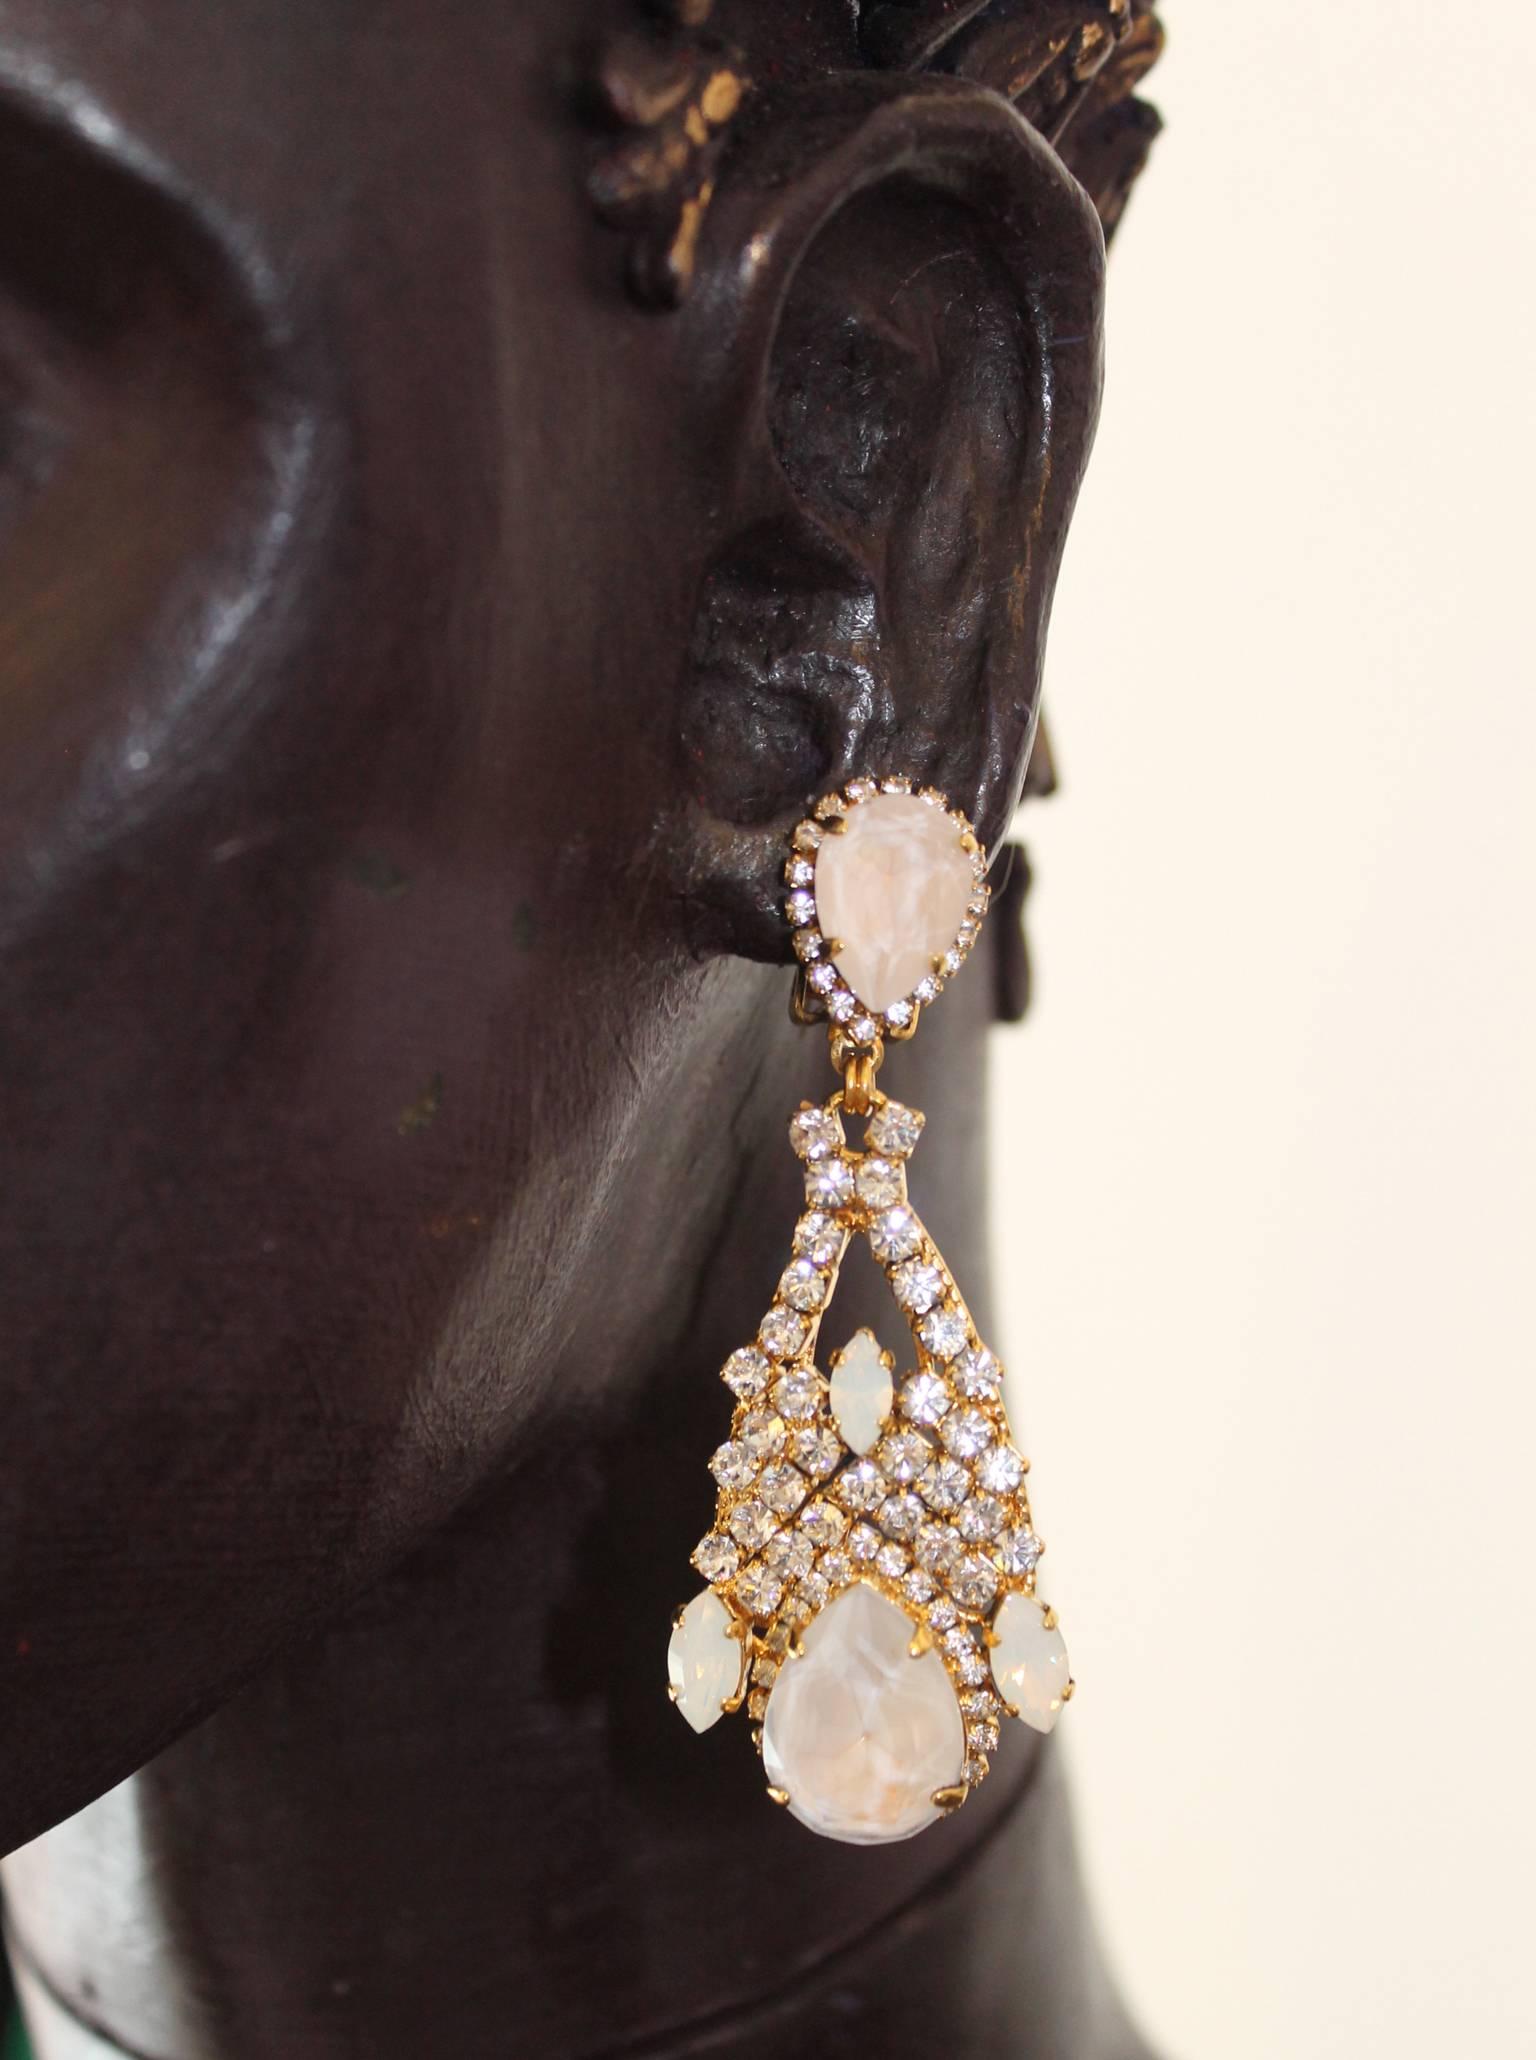 Elegant statement chandelier earrings by VICKISARGE; featuring both clear and hand-enamelled opaque white Swarovski crystals on a 23ct gold base, they are each individually handmade in the Belgravia studios under the eponymous Elizabeth St